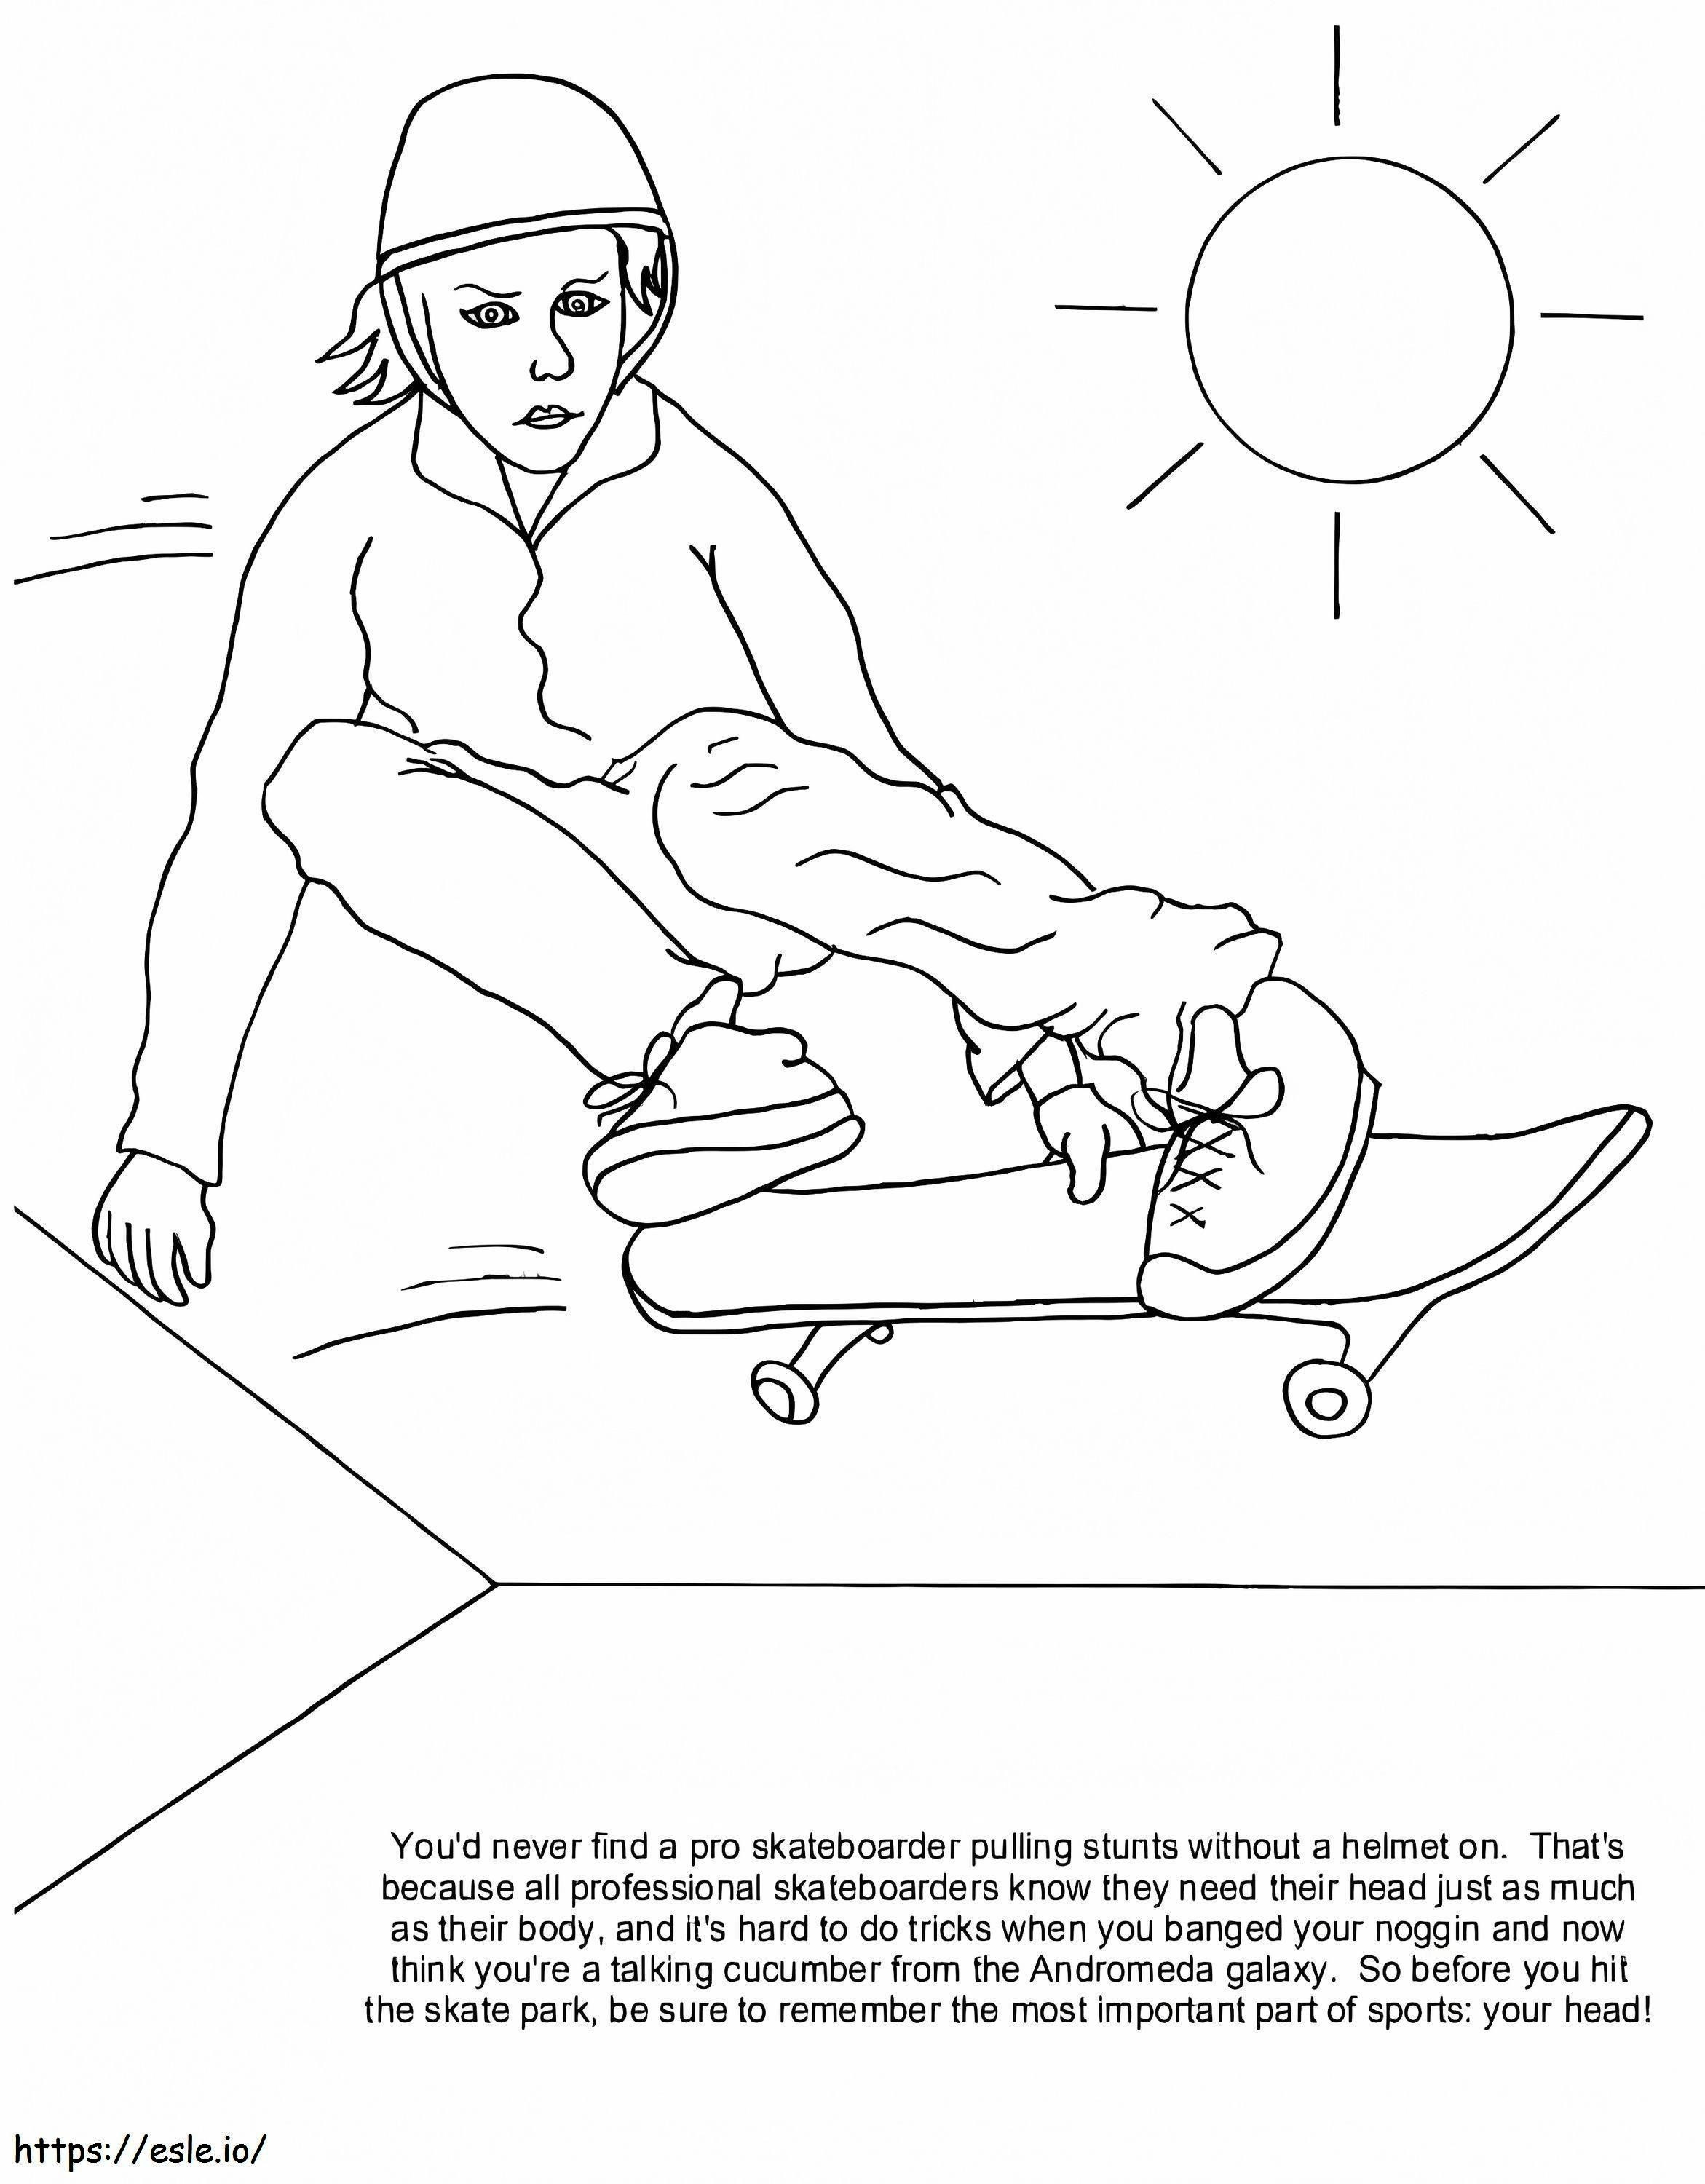 Skateboard Safety coloring page